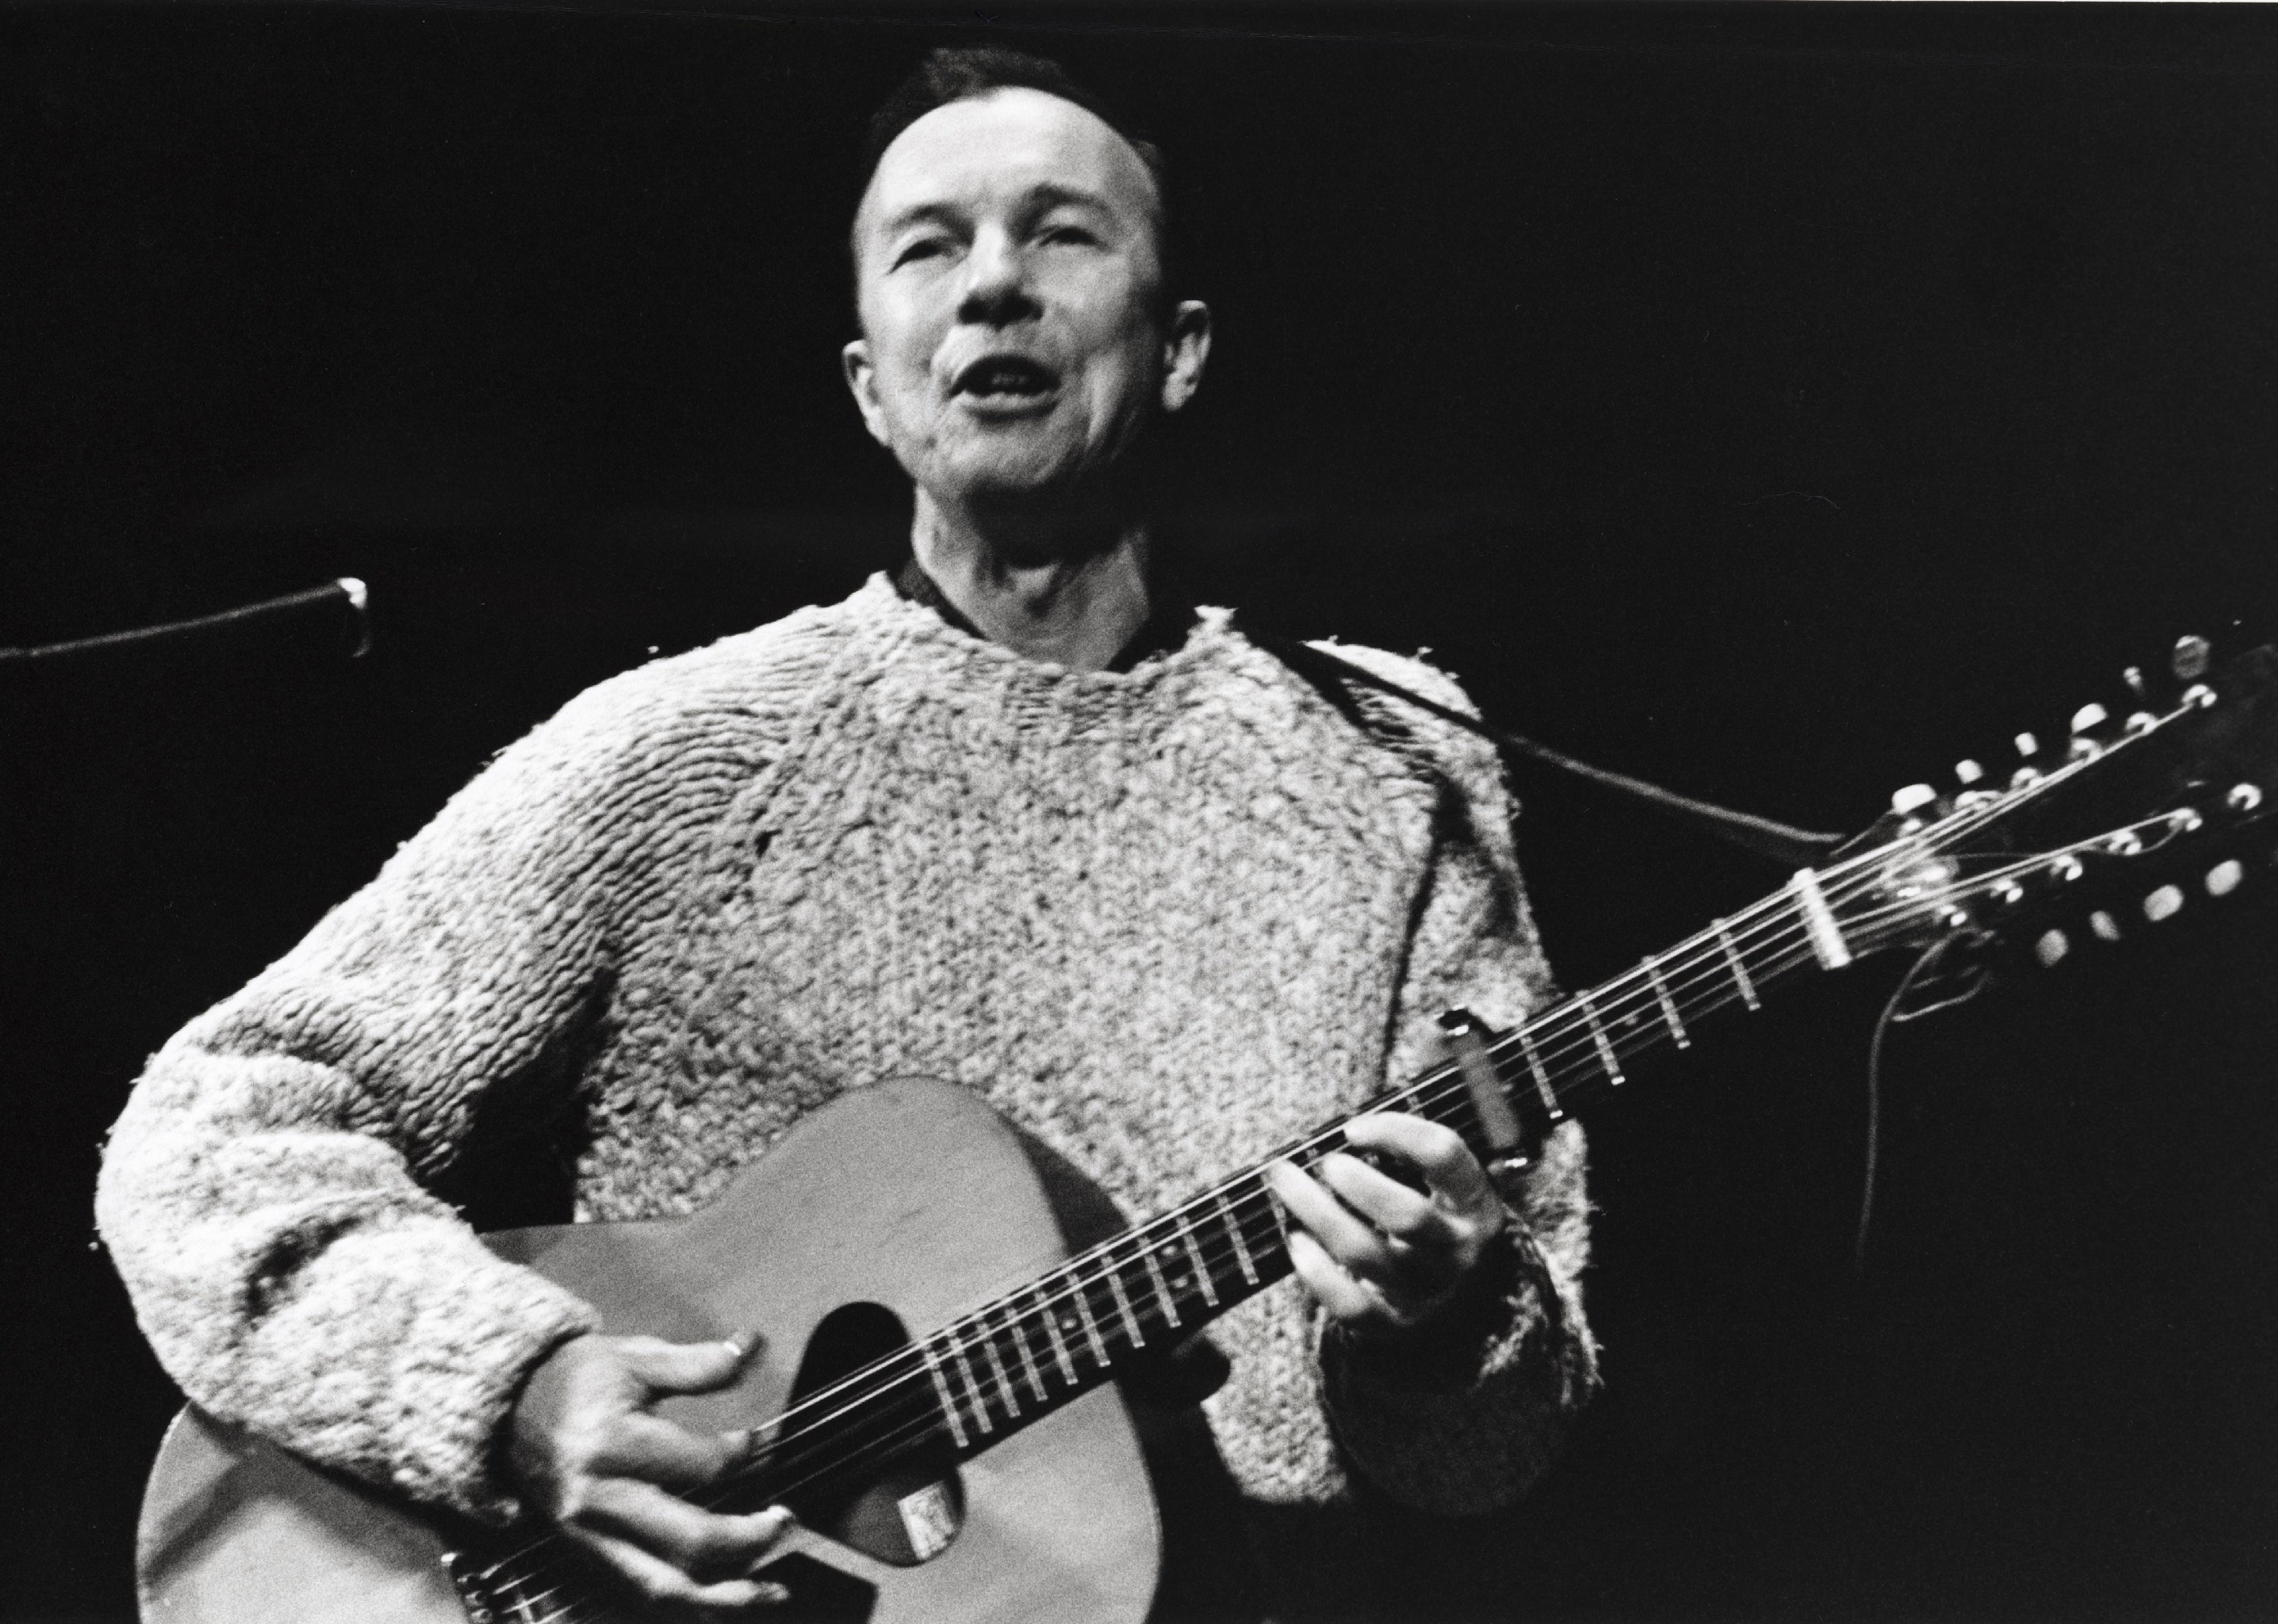 <p>Folk legend Pete Seeger took on the dual role of performer and educator when playing to a crowd of Bowdoin students in 1960. Every so often, he would stop the music and <a href="https://bowdoinorient.com/2019/04/26/caught-on-tape-pete-seegers-1960-visit-to-bowdoin/">help teach the audience</a> how to perform folk songs on their own. The concert made up part of a broader campus event and helped raise money for charity.</p>